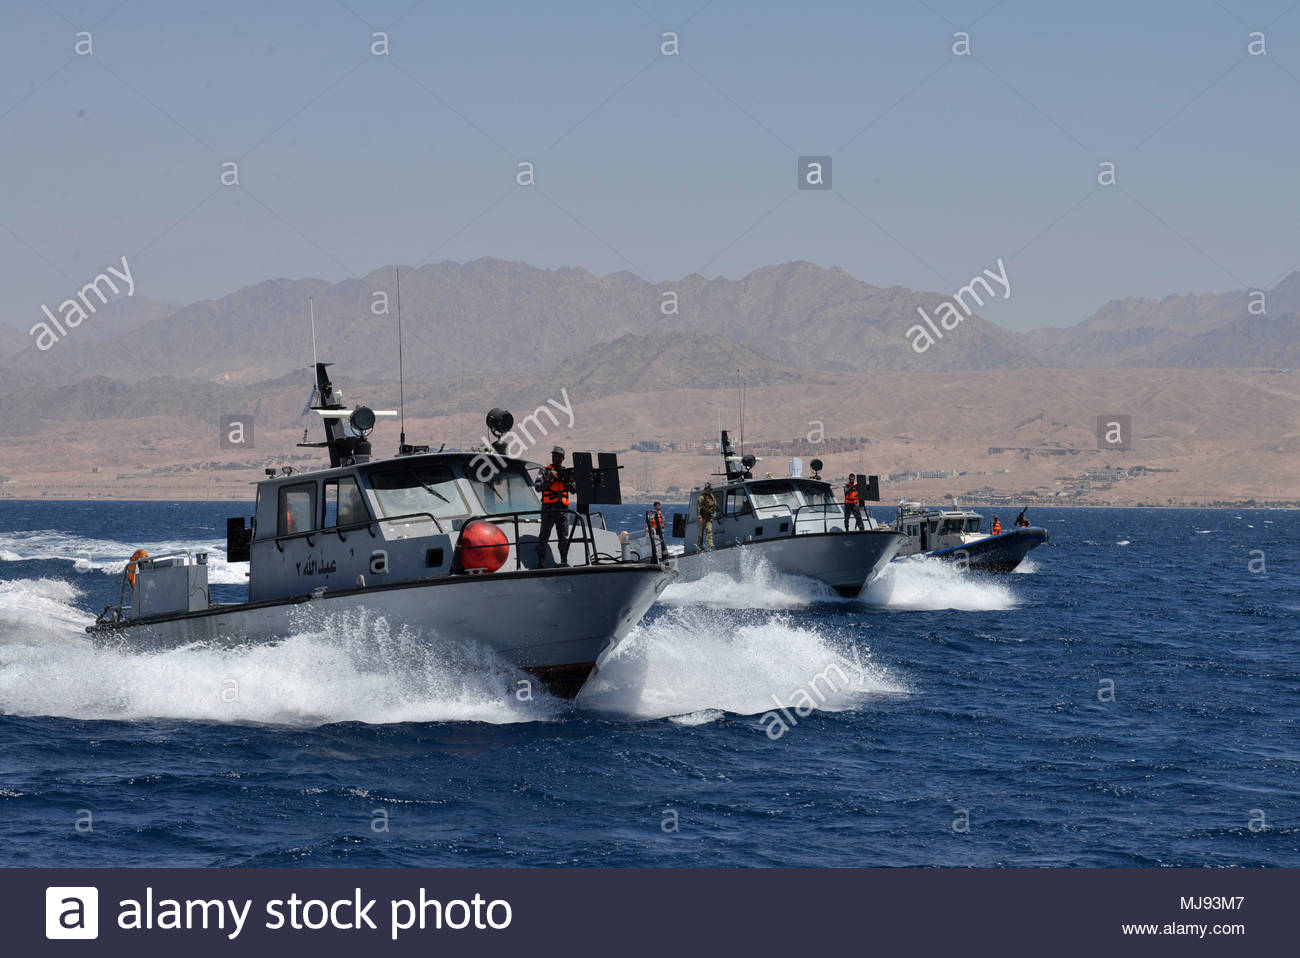 aqaba-jordan-april-22-2018-three-royal-jordanian-patrol-boats-align-during-a-bi-lateral-boat-maneuvering-exercise-with-coastal-riverine-squadron-4-and-royal-jordanian-navy-combat-boats-group-during-eager-lion-april-22-2018-eager-lion-is-a-capstone-training-engagement-that-provides-us-forces-and-the-jordan-armed-forces-an-opportunity-to-rehearse-operating-in-a-coalition-environment-and-to-pursue-new-ways-to-collectively-address-threats-to-regional-security-and-improve-overall-maritime-security-us-navy-photo-by-mass-communication-specialist-1st-class-sandi-grimnes-morenorelea-MJ93M7.jpg